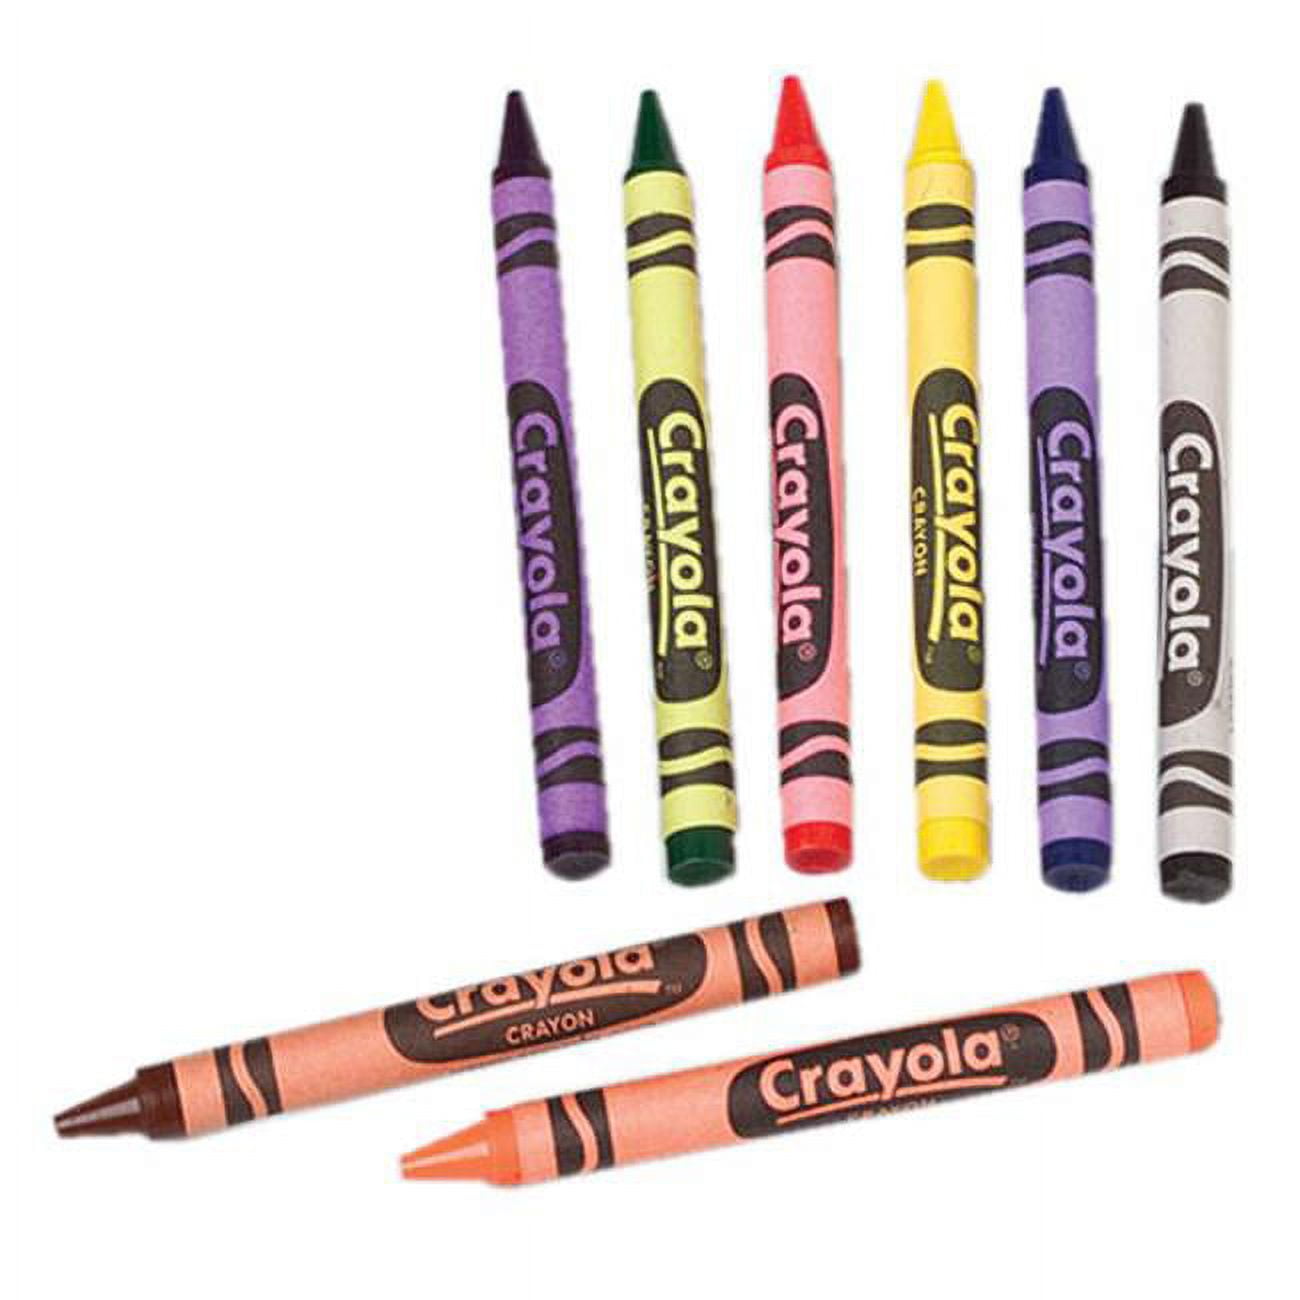 Crayola® World of Colors Crayons Classpack Value Pack - 400 Count